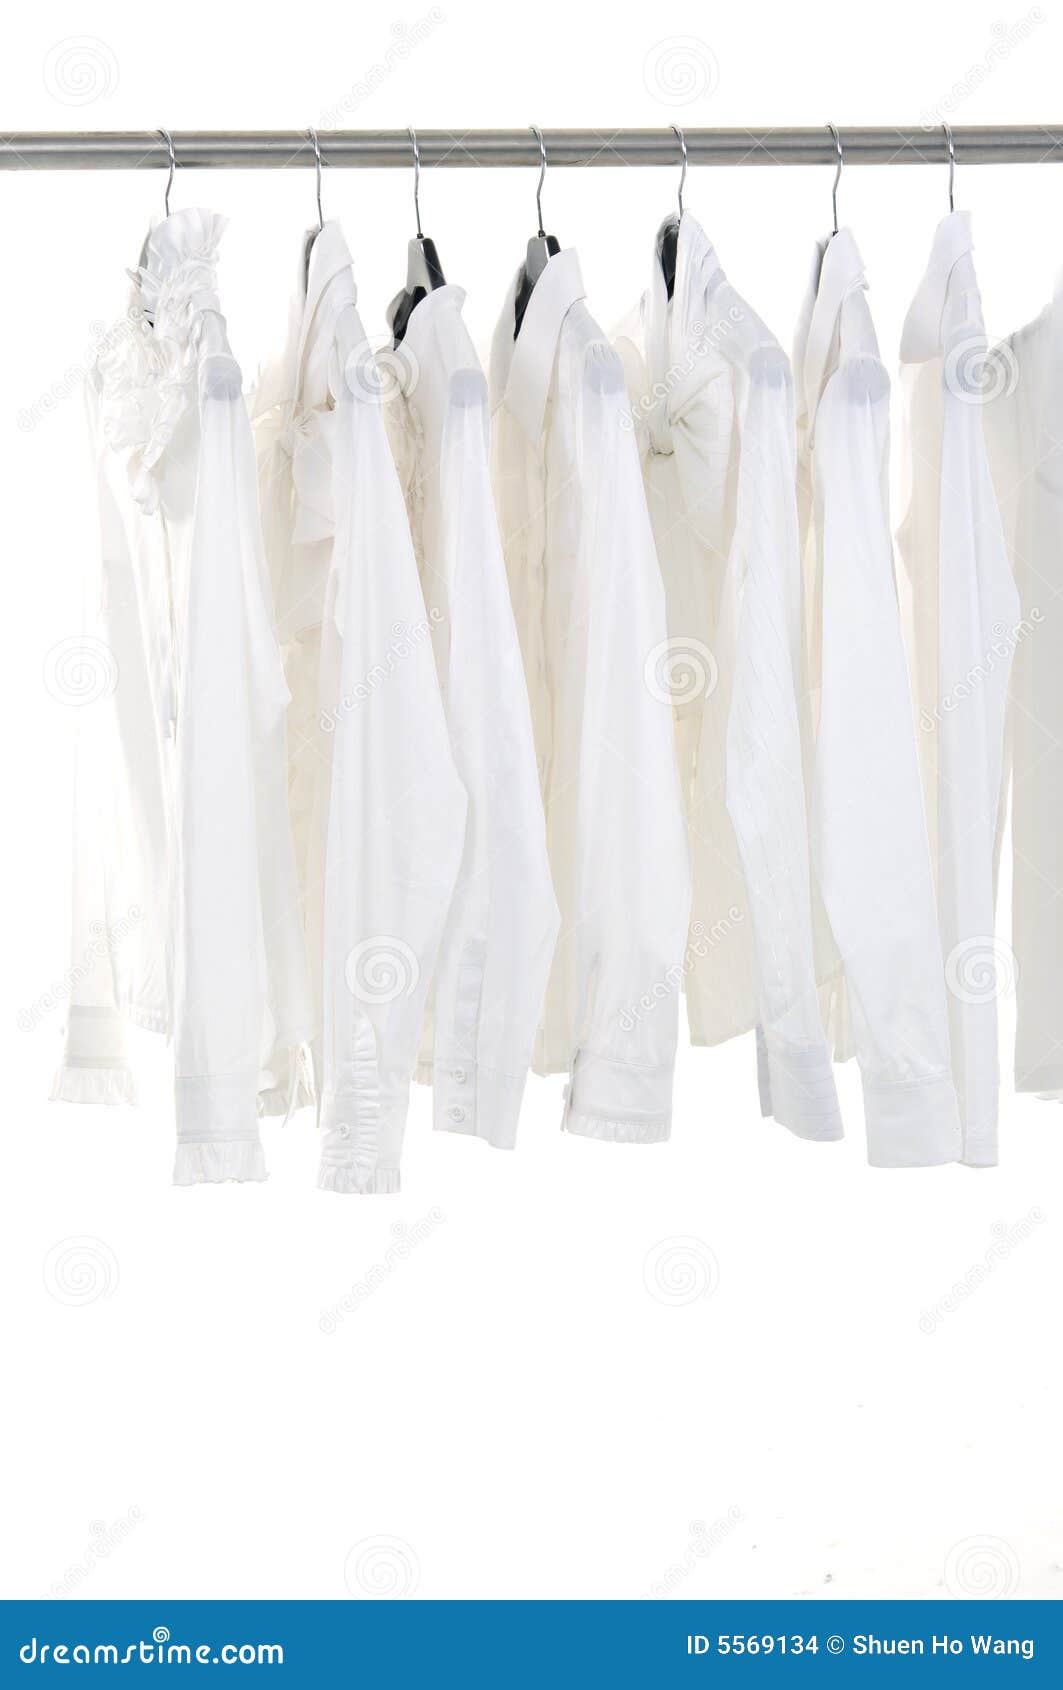 Designer clothing stock photo. Image of shirt, color, clothes - 5569134